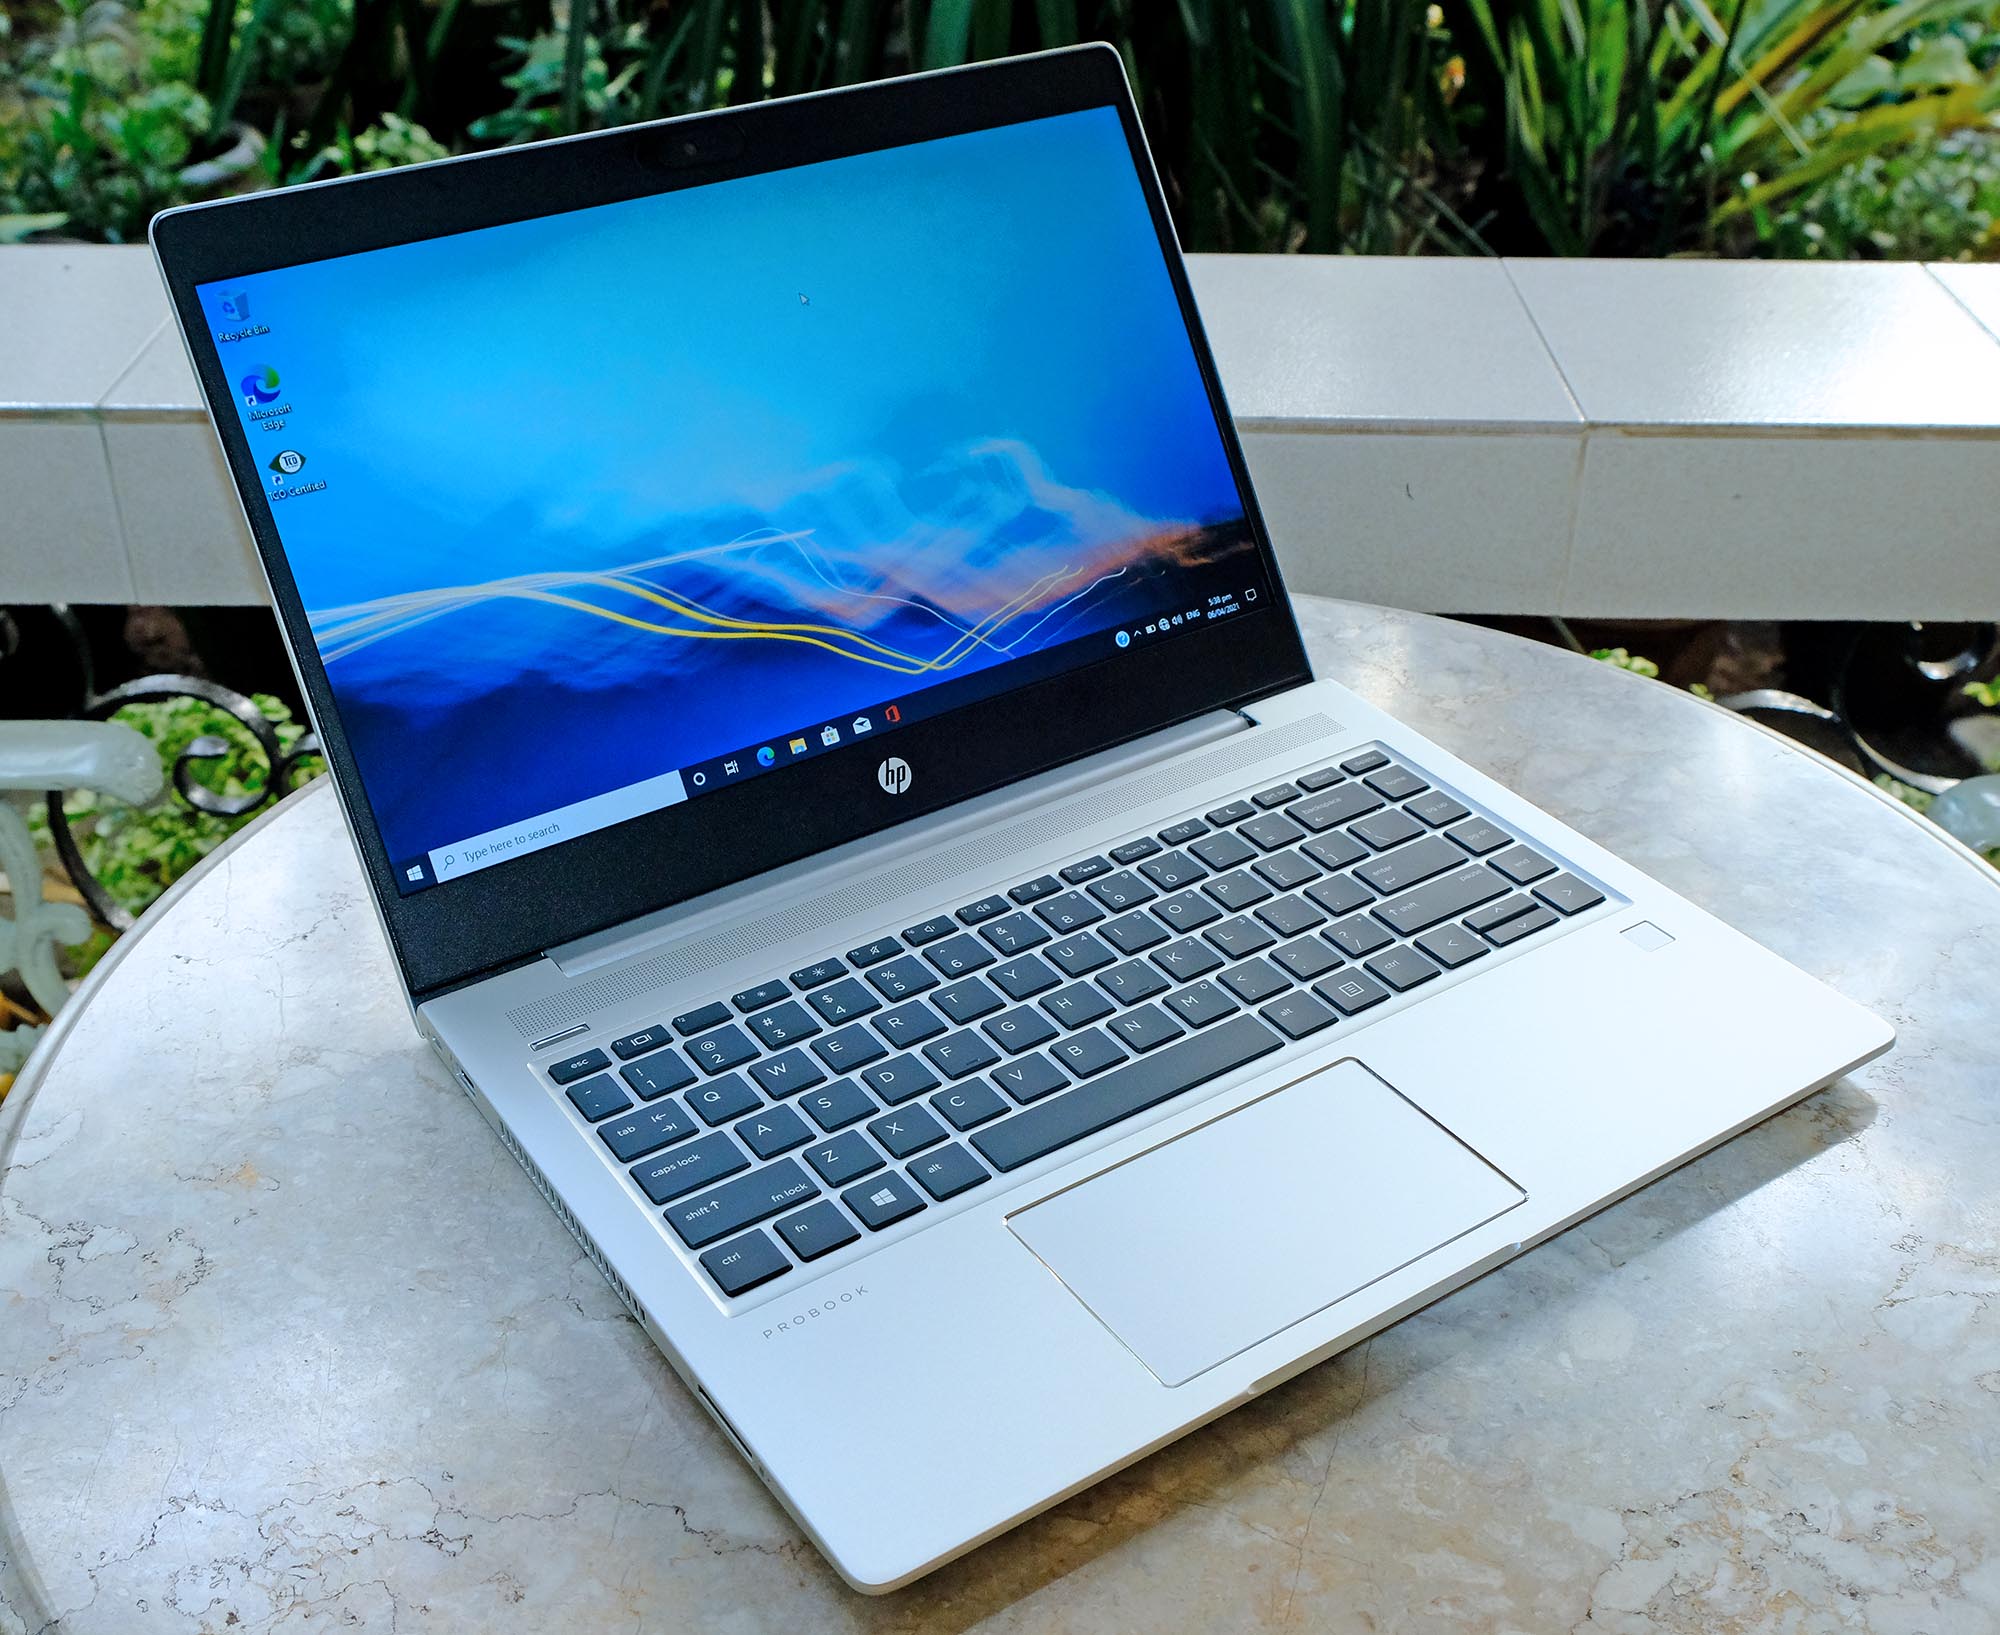 Review: HP ProBook 445 G7 Notebook PC – Features, Photos, Full